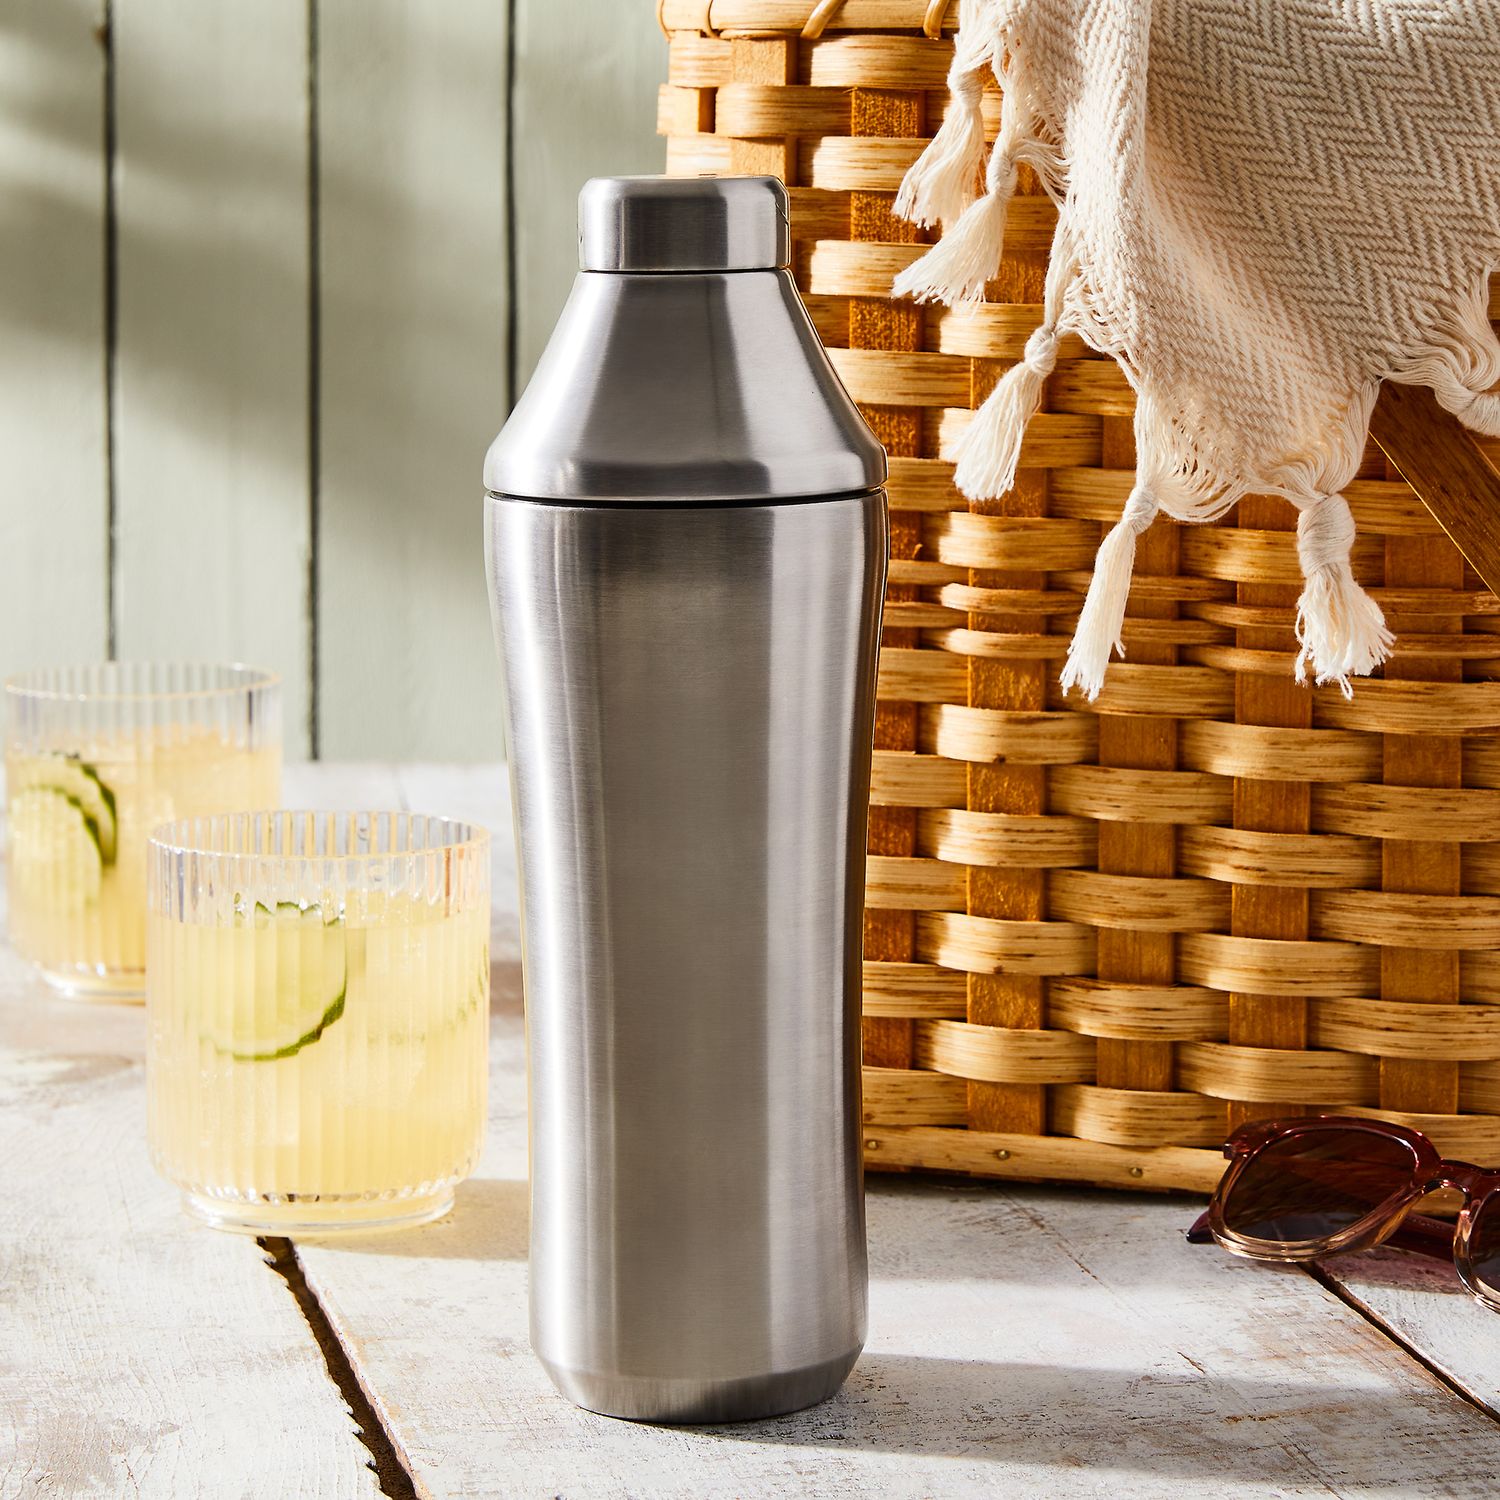 Elevated Craft: The last cocktail shaker you will ever buy